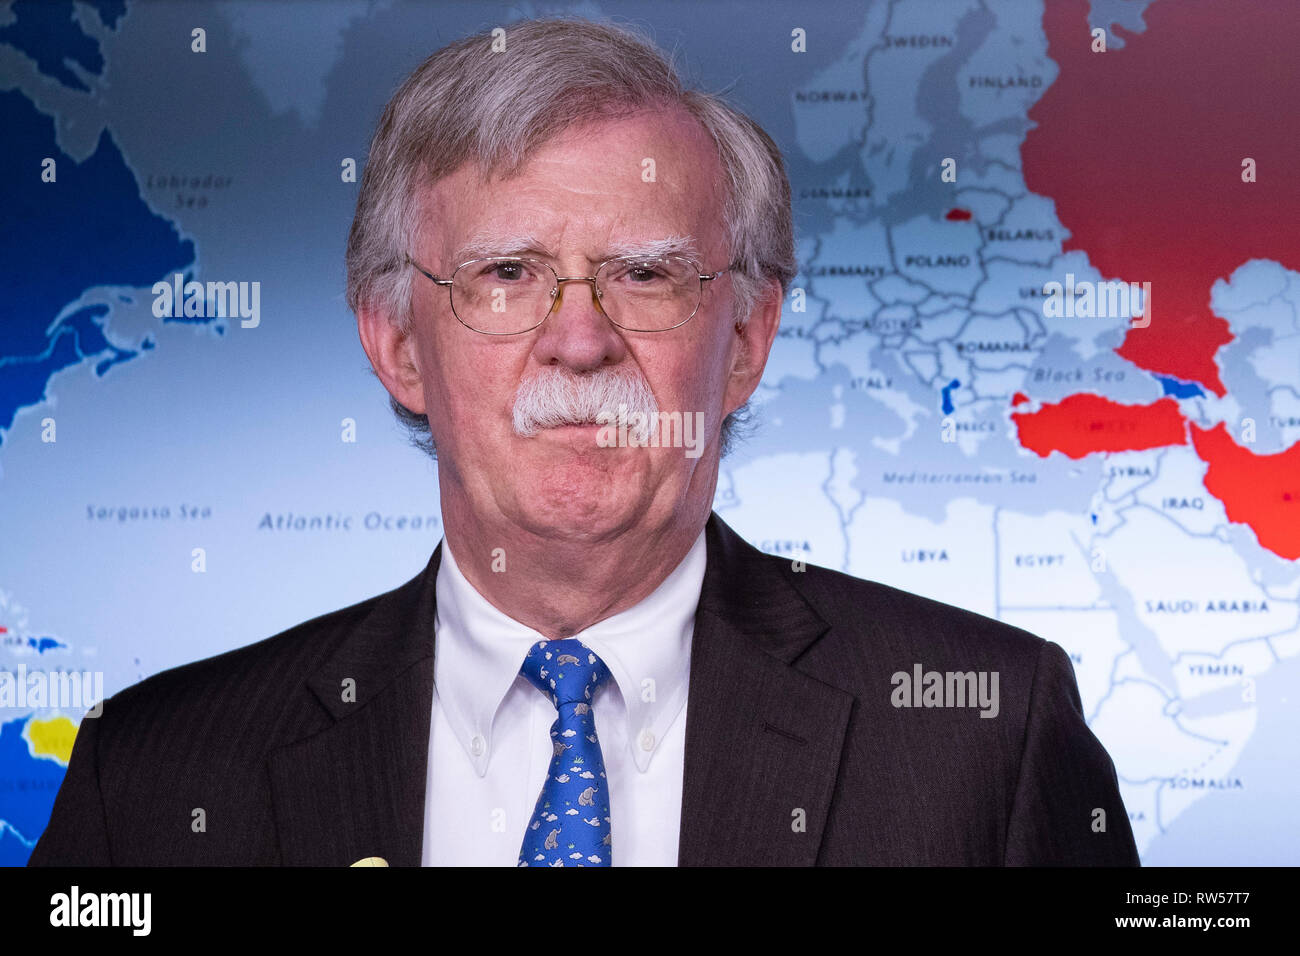 National Security Advisor John Bolton takes questions from reporters at the White House in Washington, DC on January 28, 2019. The White House has announced new economic sanctions against Venezuela. Stock Photo